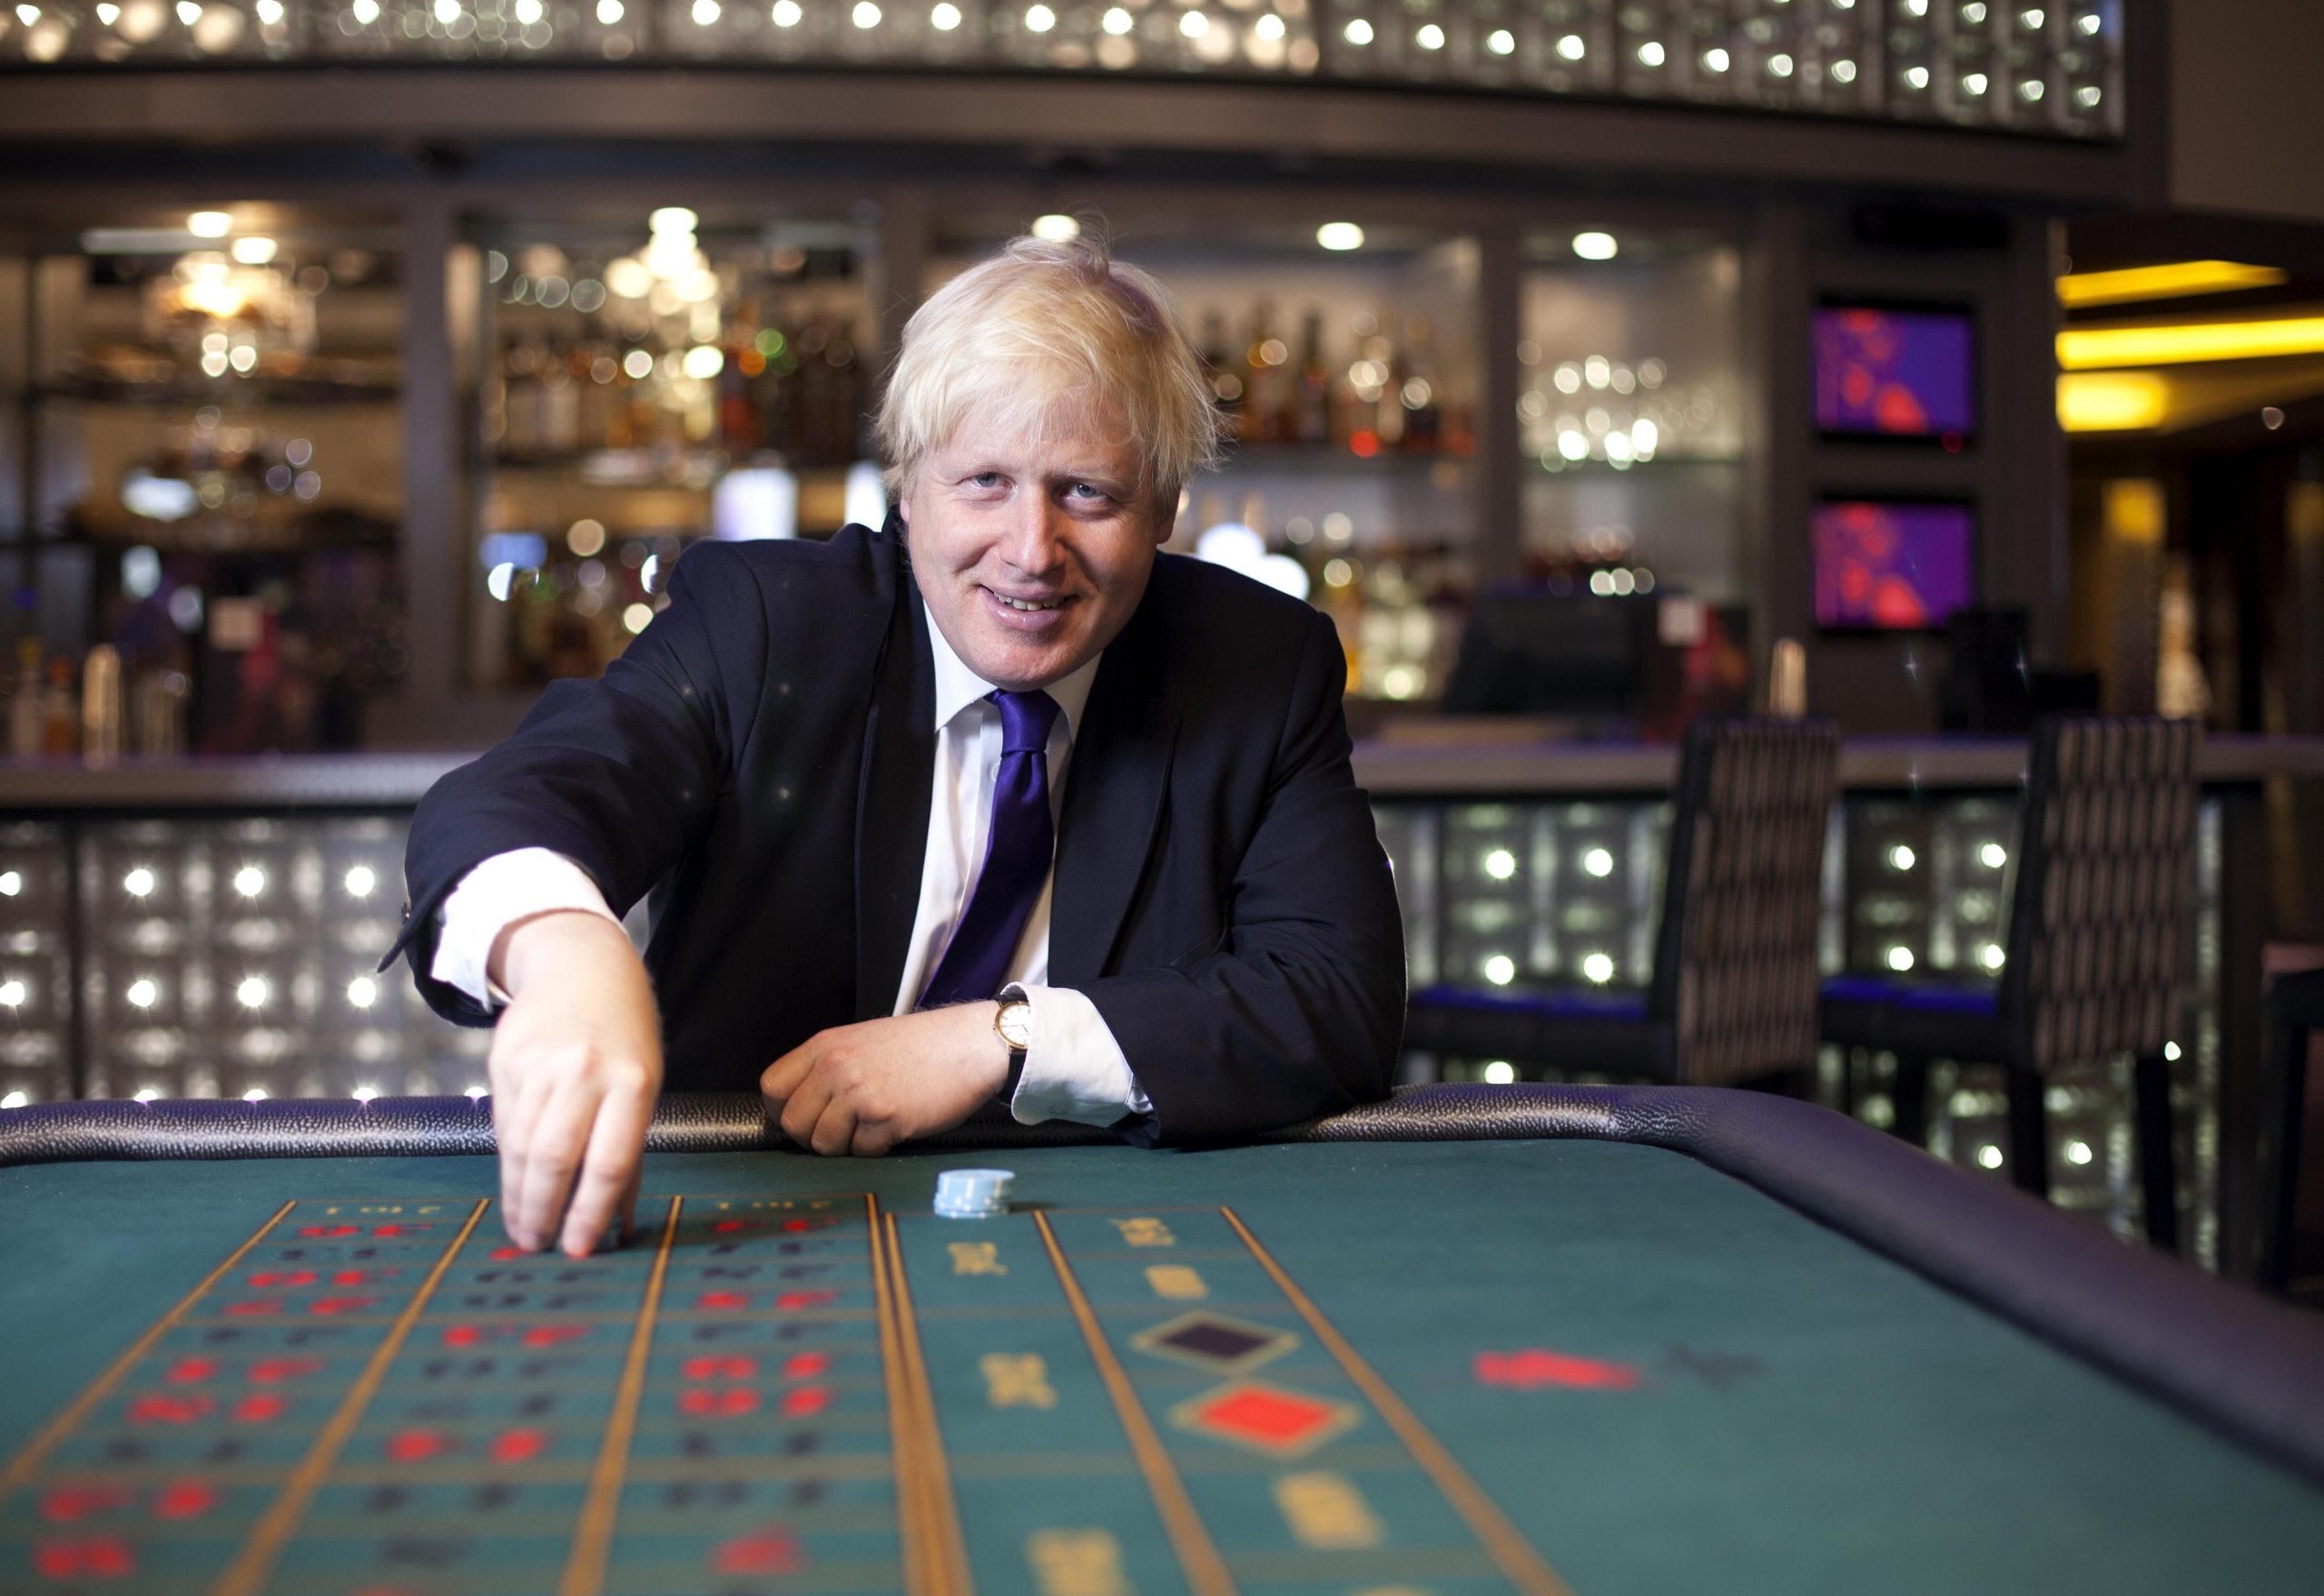 UK Prime Minister Confirms England's Casinos Can Reopen Aug 1 ...